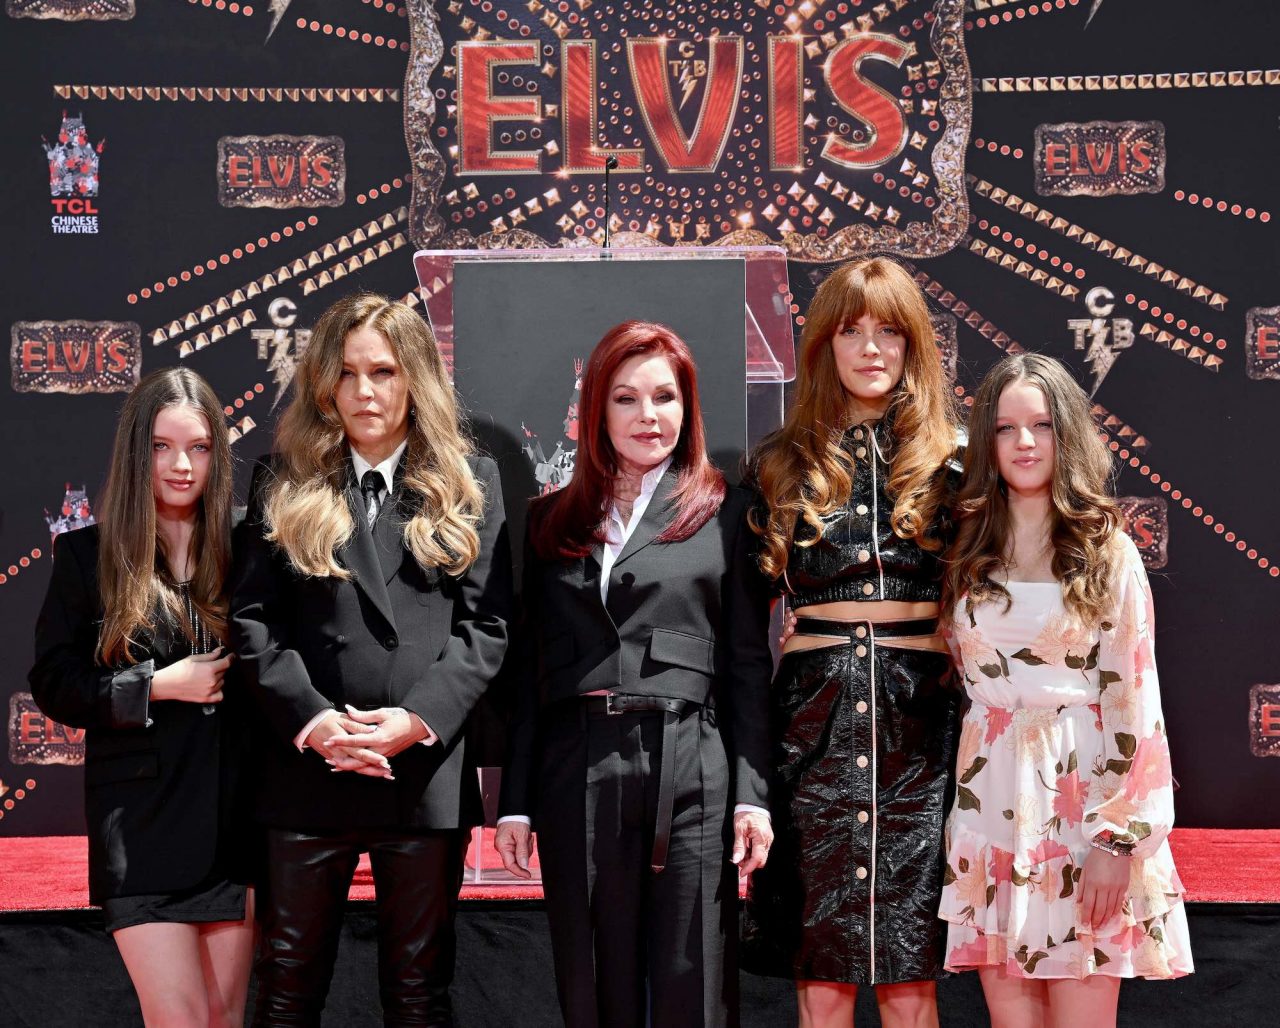 HOLLYWOOD, CALIFORNIA - JUNE 21: (L-R) Harper Vivienne Ann Lockwood, Lisa Marie Presley, Priscilla Presley, Riley Keough, and Finley Aaron Love Lockwood attend the Handprint Ceremony honoring Three Generations of Presley's at TCL Chinese Theatre on June 21, 2022 in Hollywood, California. (Photo by Axelle/Bauer-Griffin/FilmMagic)